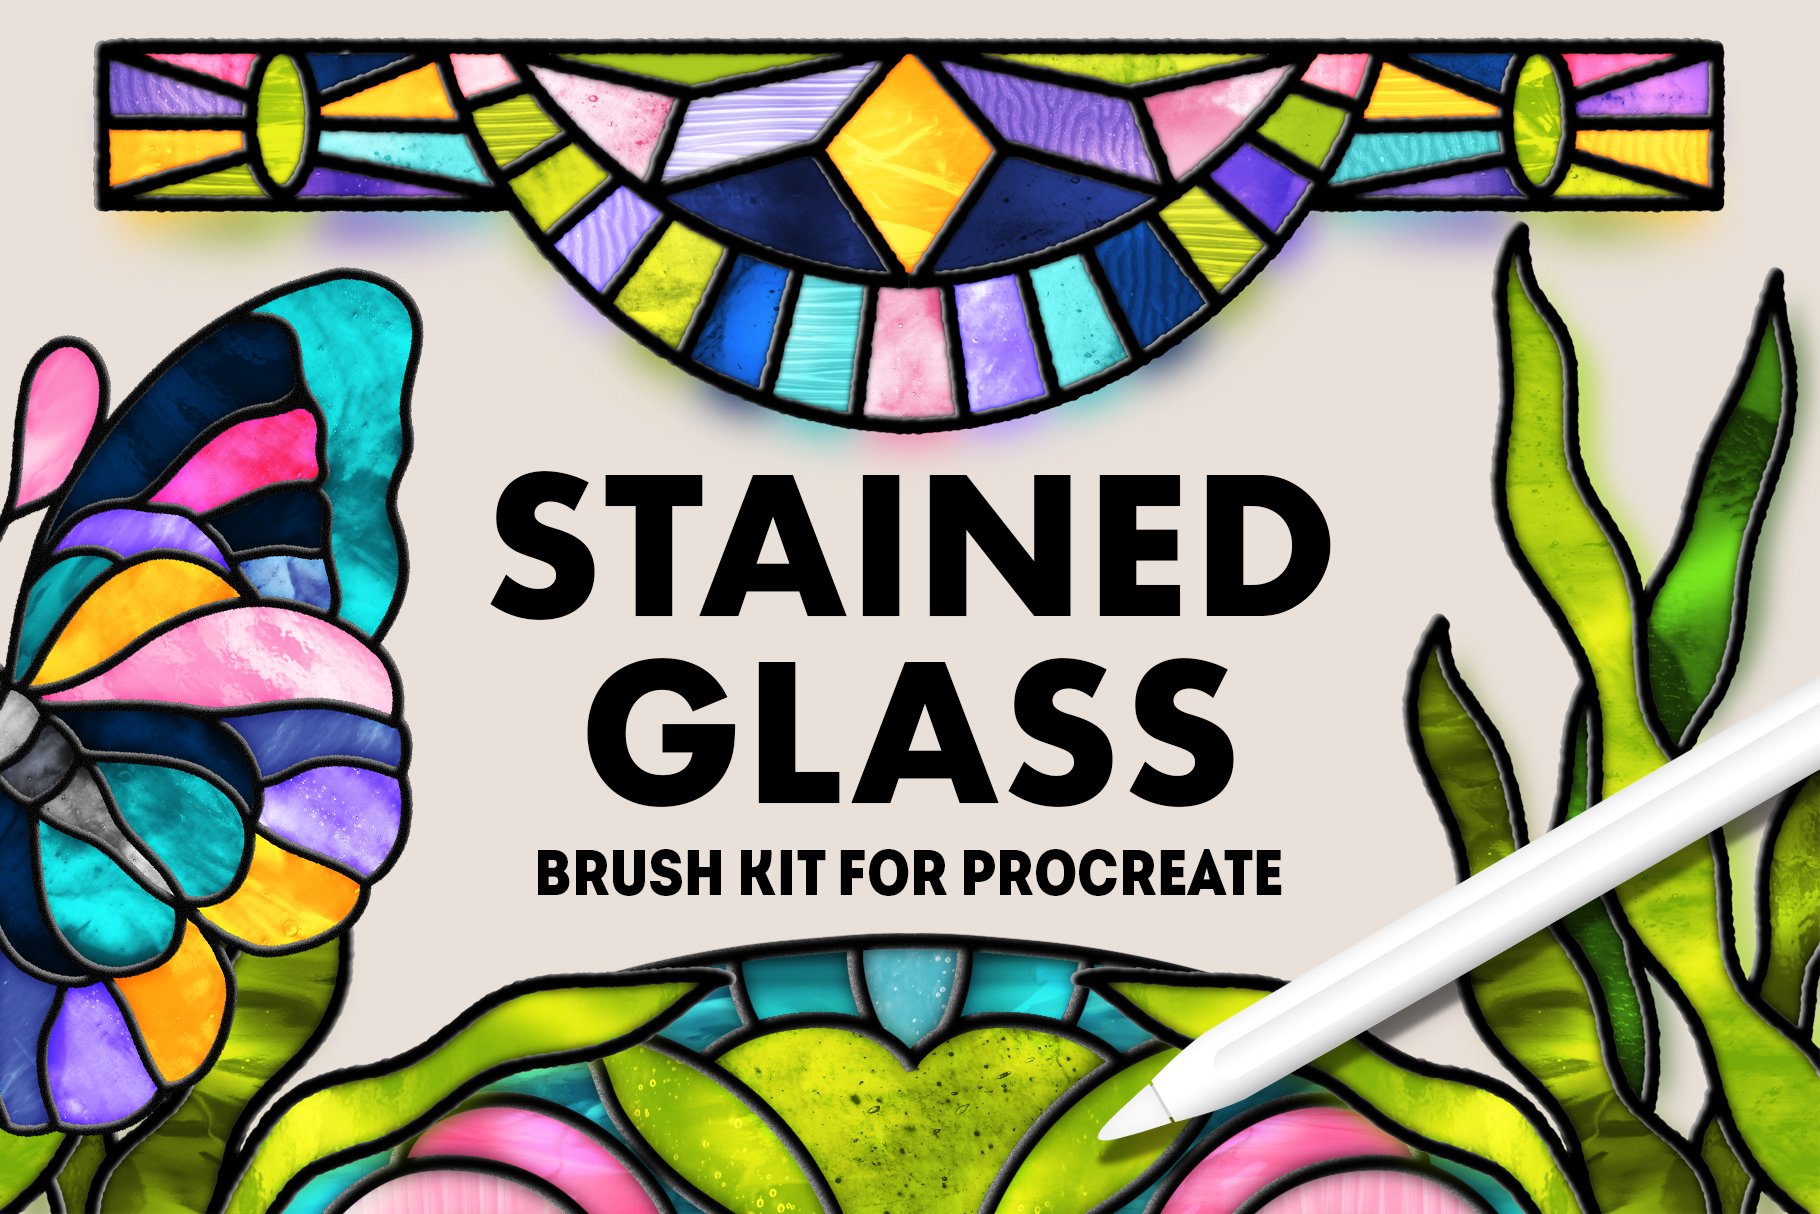 Stained Glass Brushes For Procreate - Design Cuts